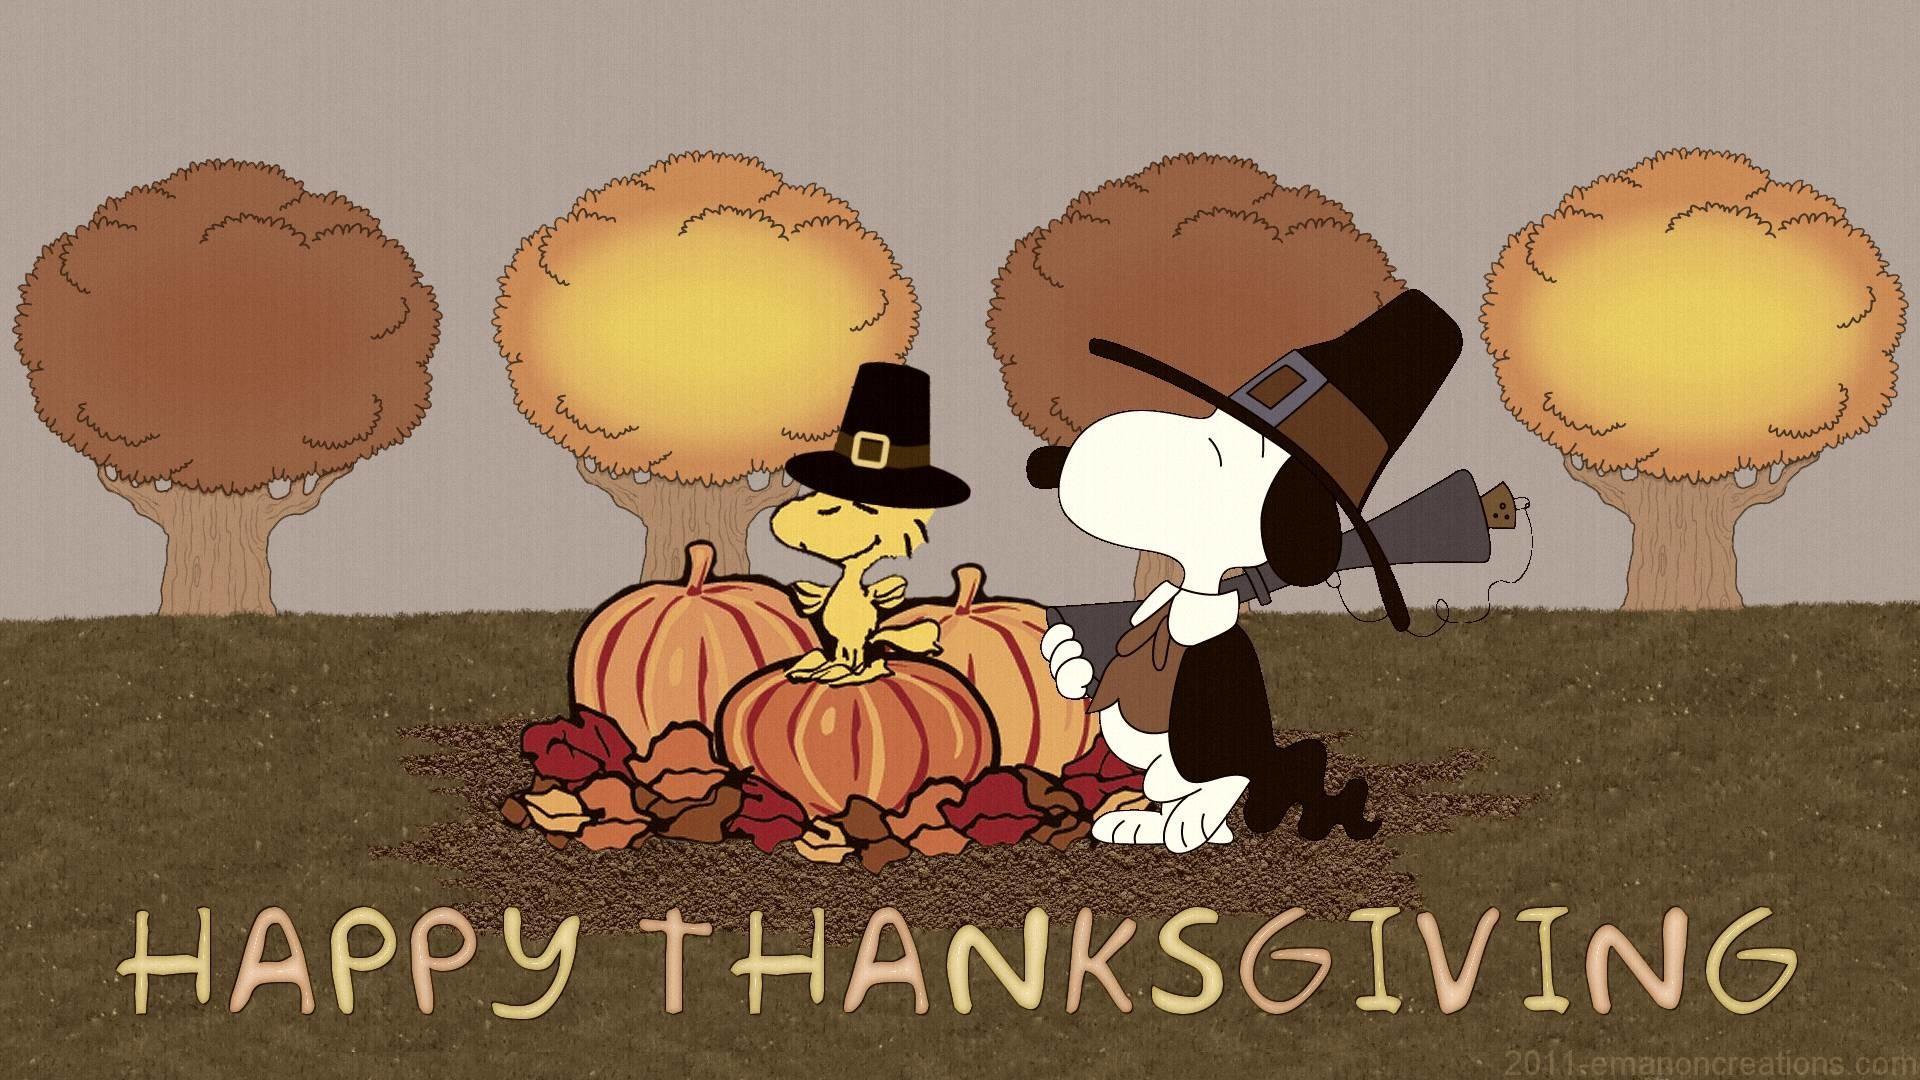 Peanuts Thanksgiving Wallpaper (the best image in 2018)